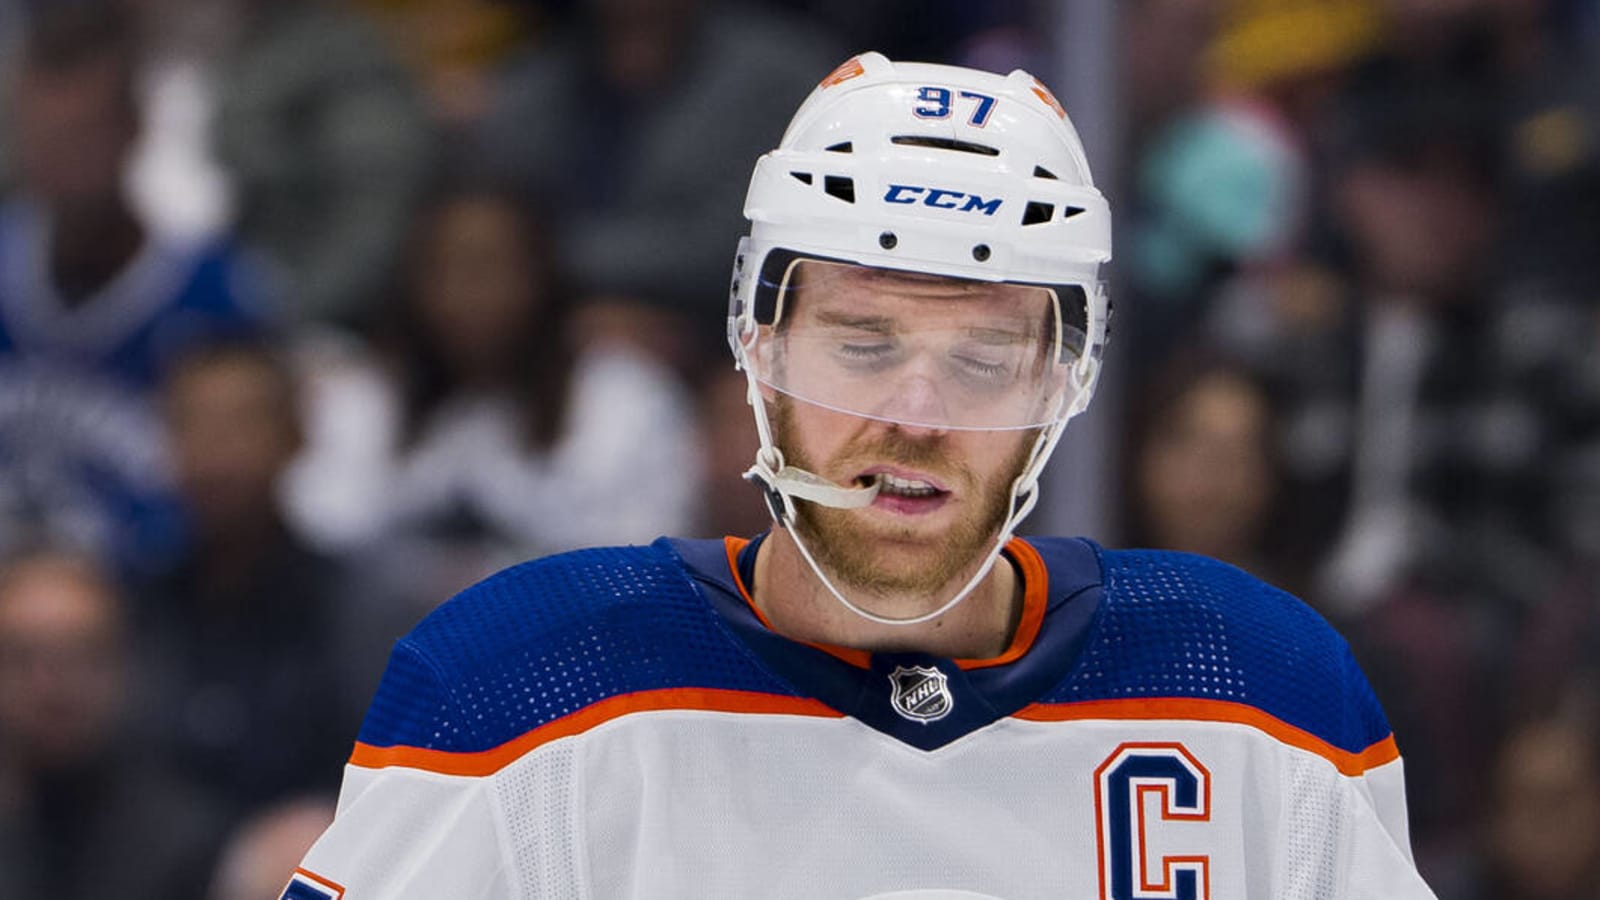 Injury could keep Oilers star out of outdoor game